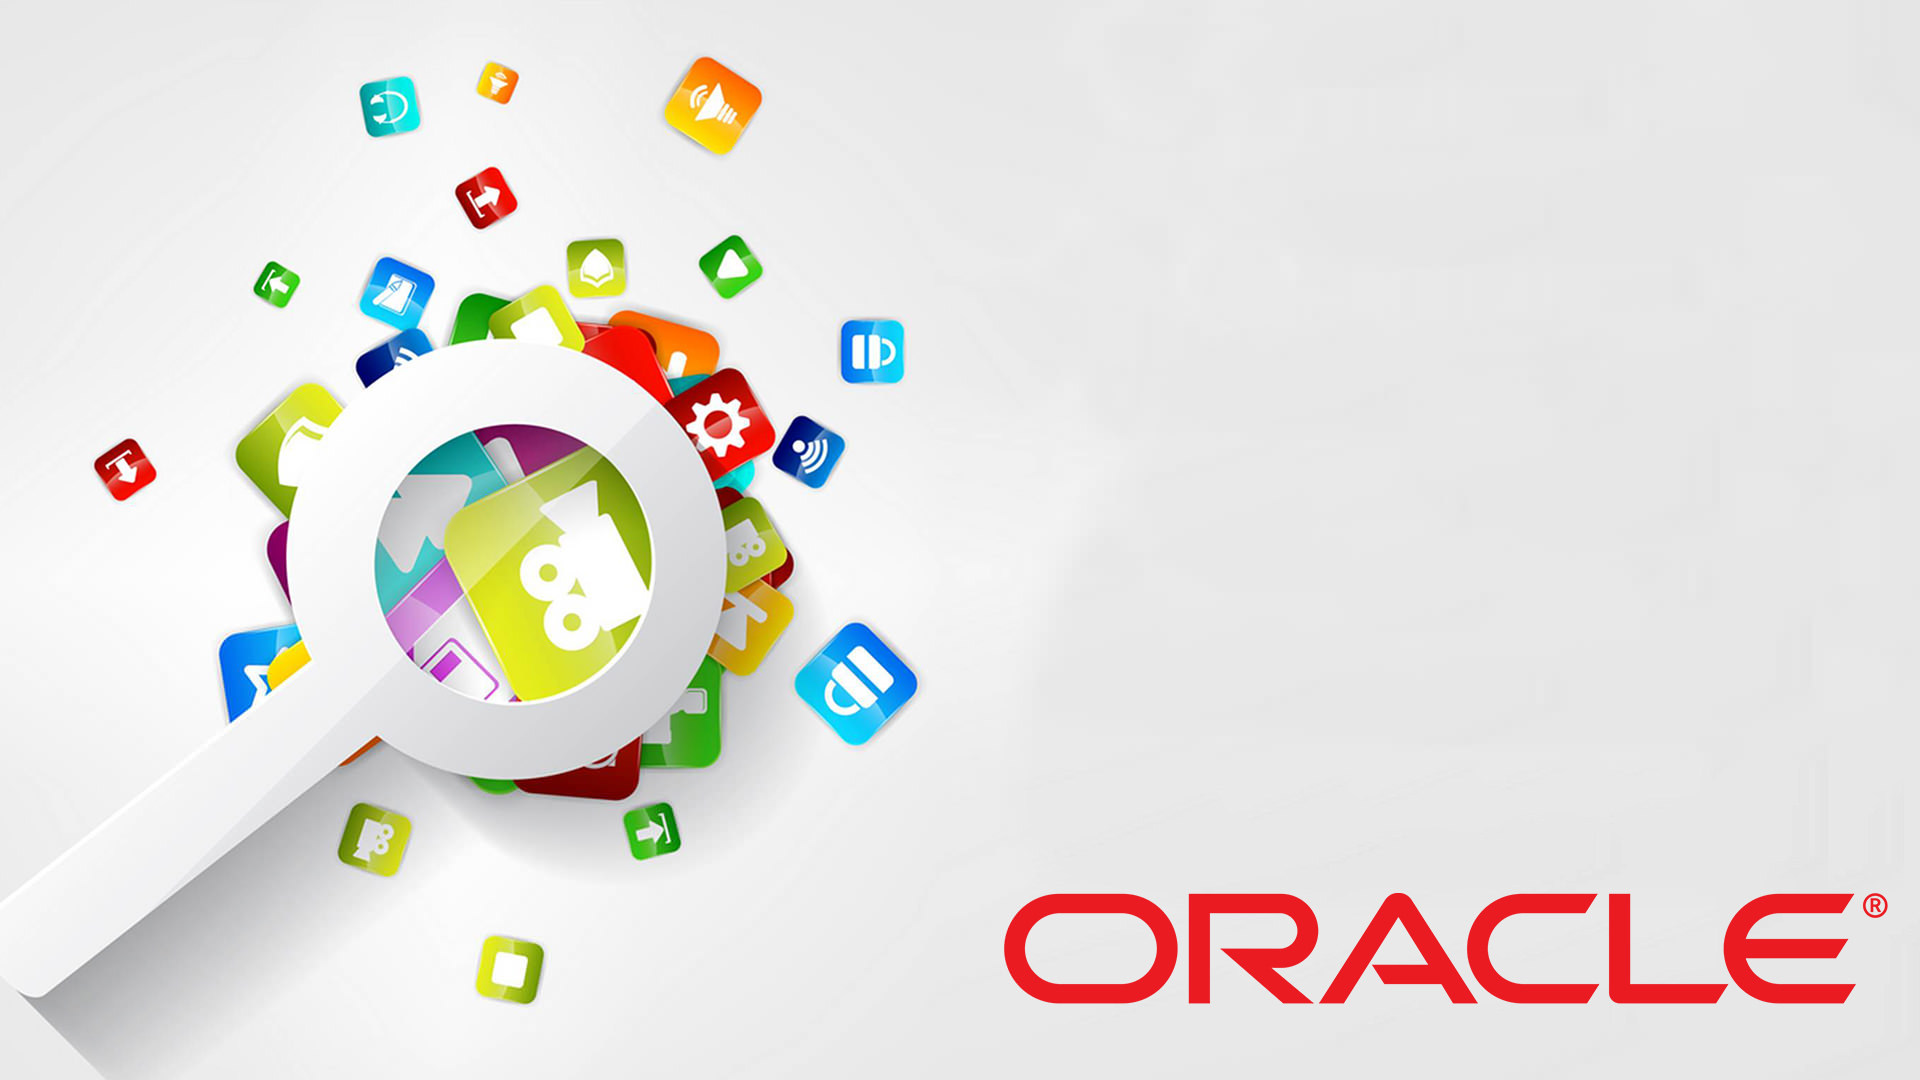 Oracle Wallpapers